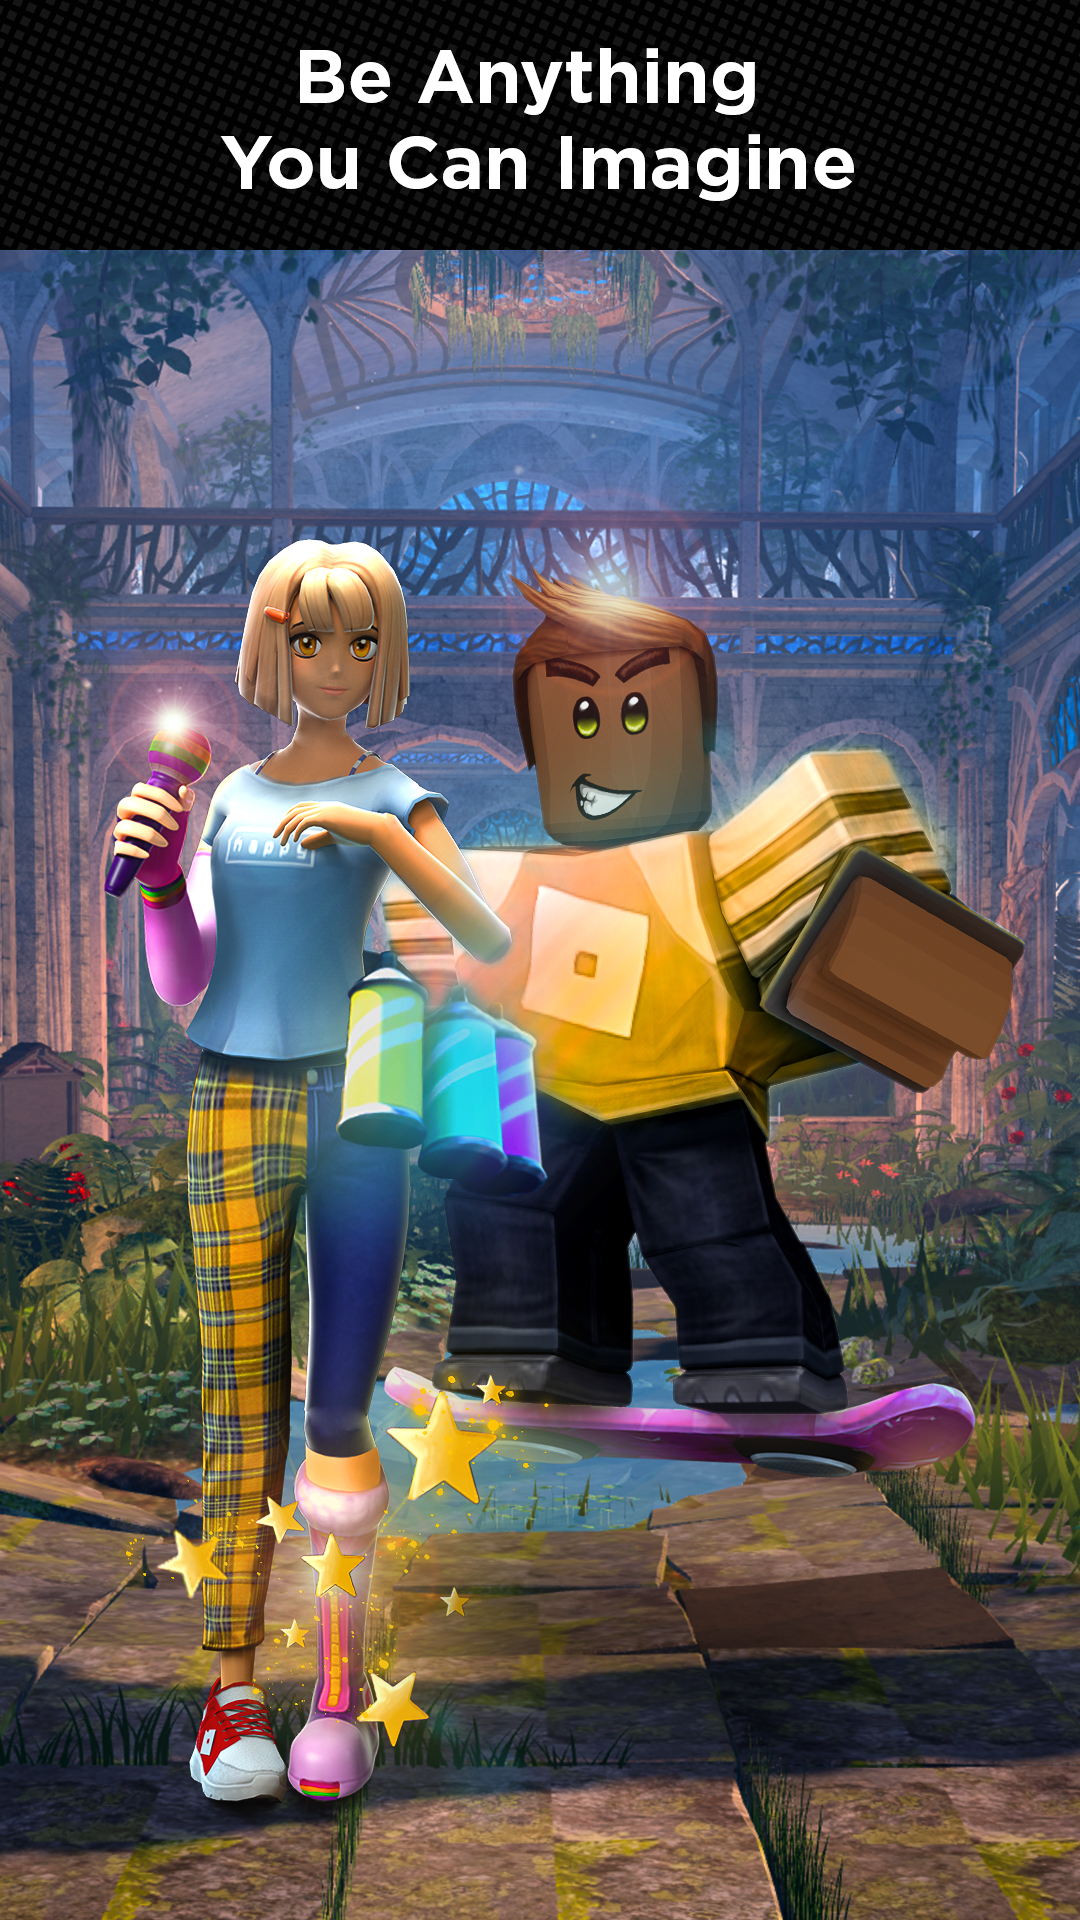 Play Roblox Online for Free on PC & Mobile